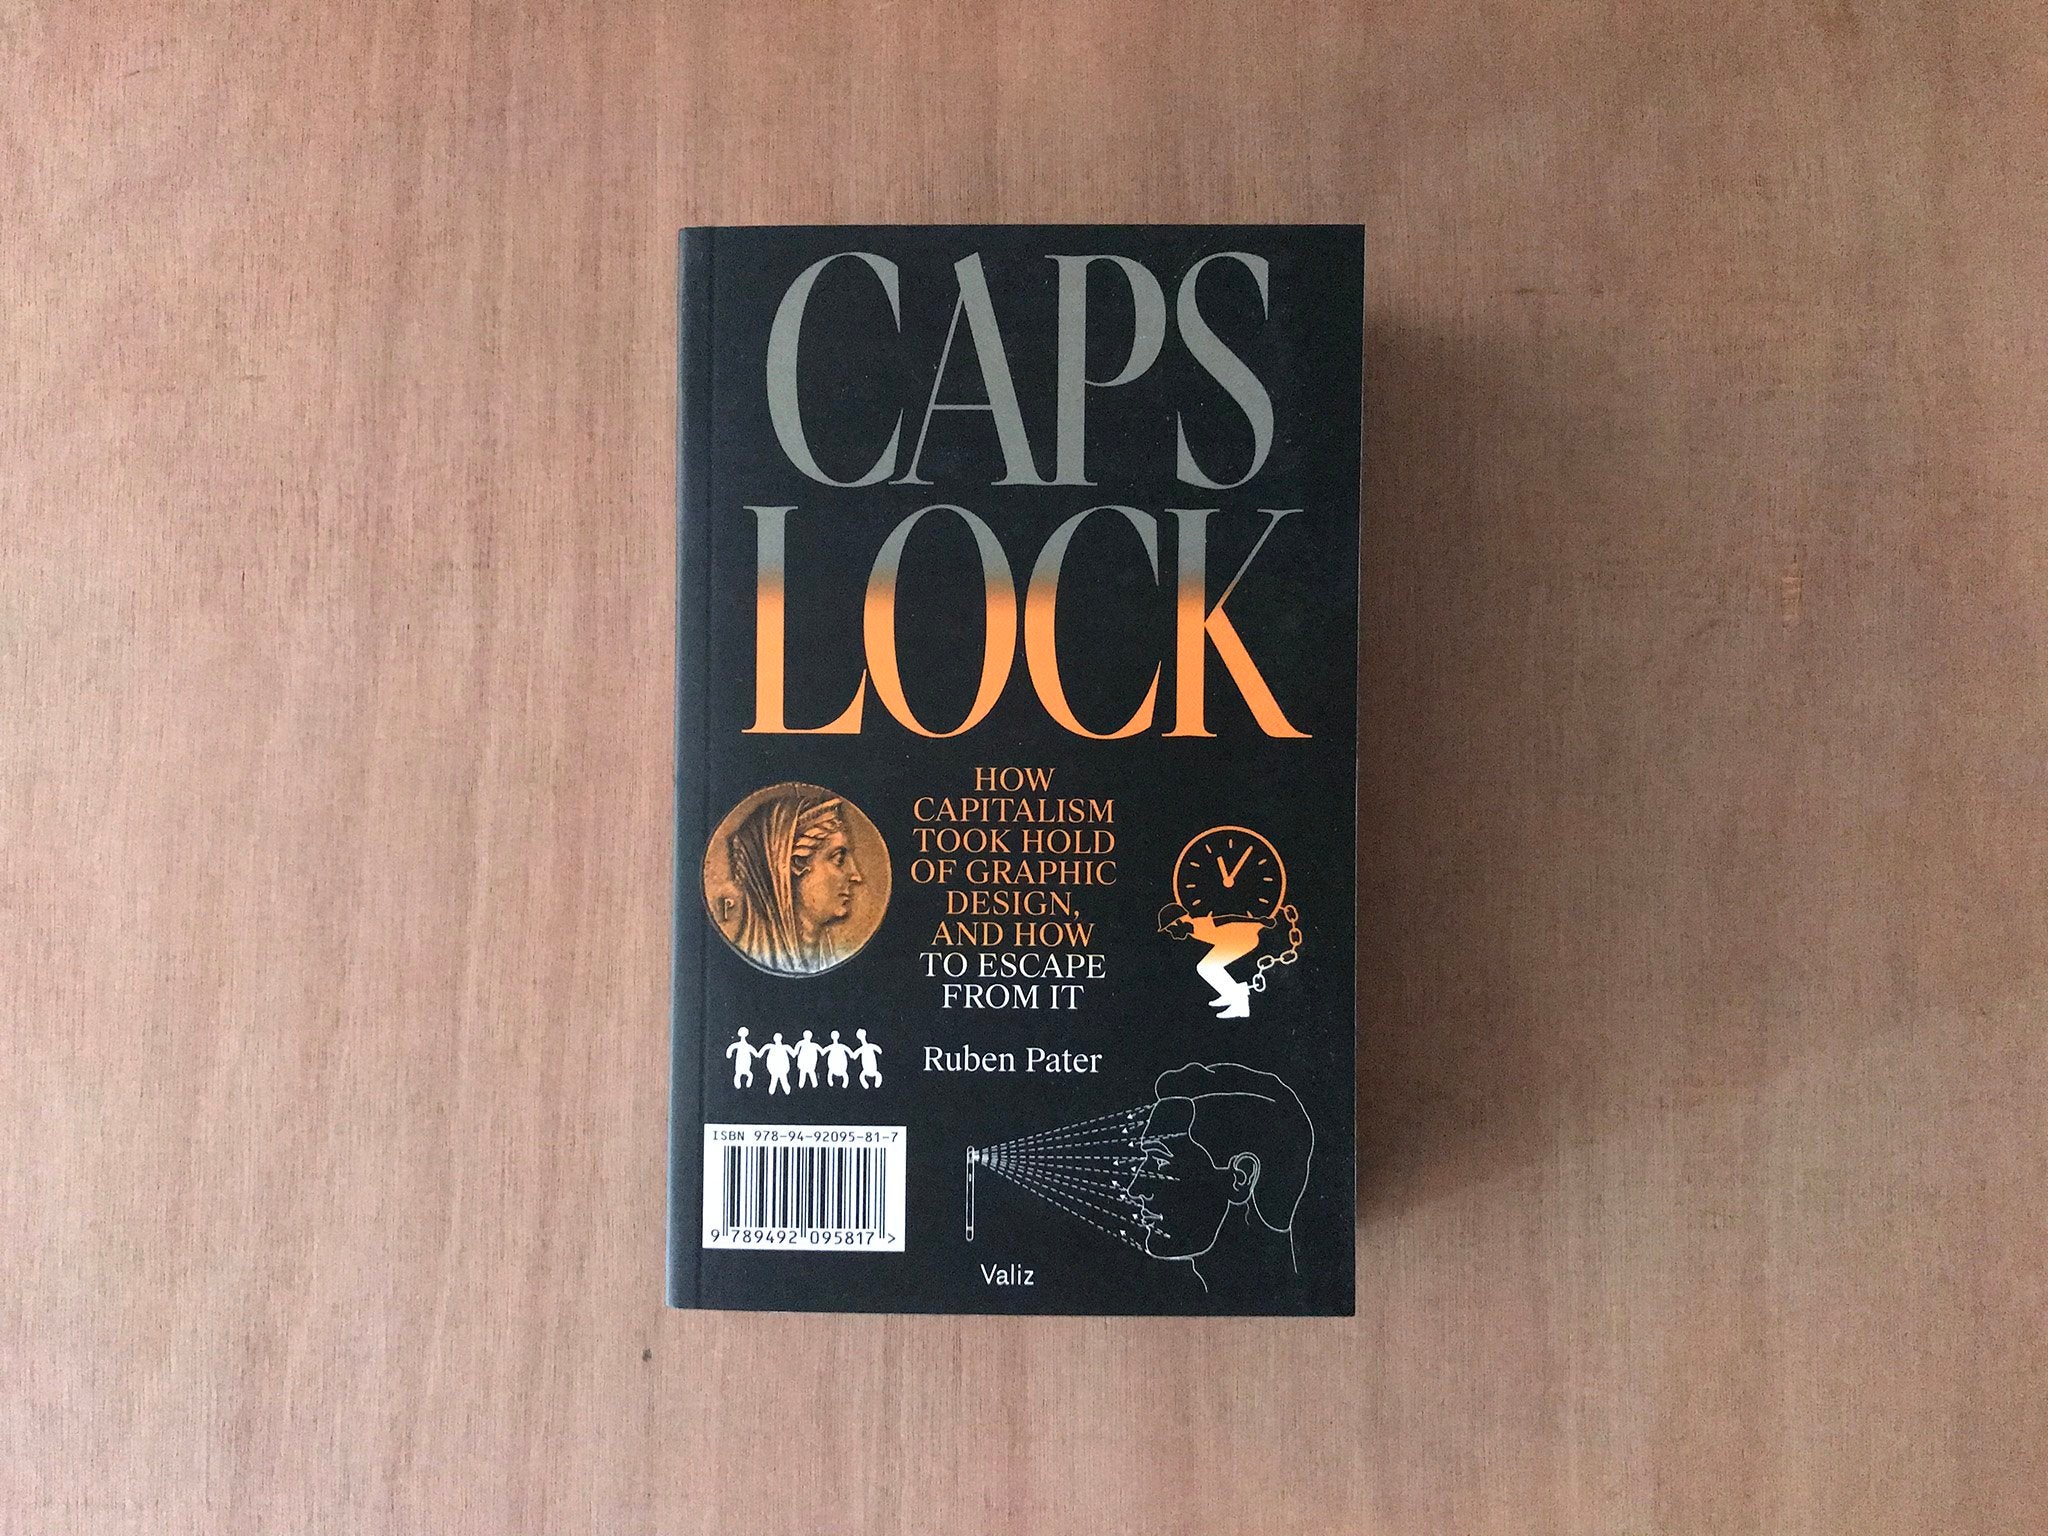 CAPS LOCK: HOW CAPITALISM TOOK HOLD OF GRAPHIC DESIGN, AND HOW TO ESCAPE FROM IT by Ruben Pater